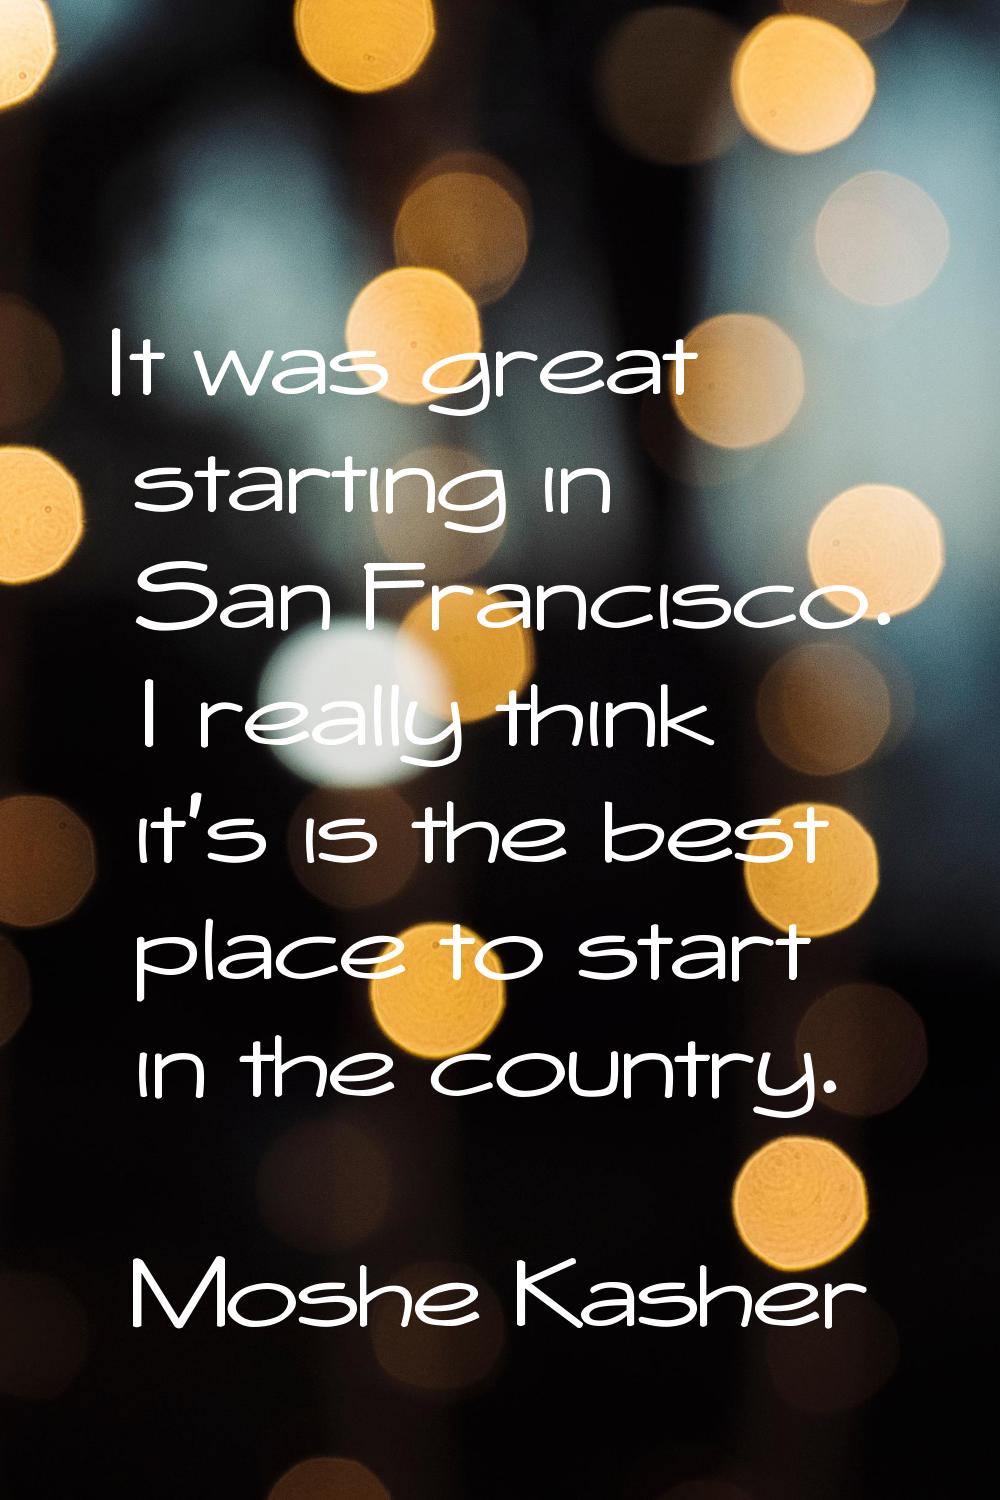 It was great starting in San Francisco. I really think it's is the best place to start in the count